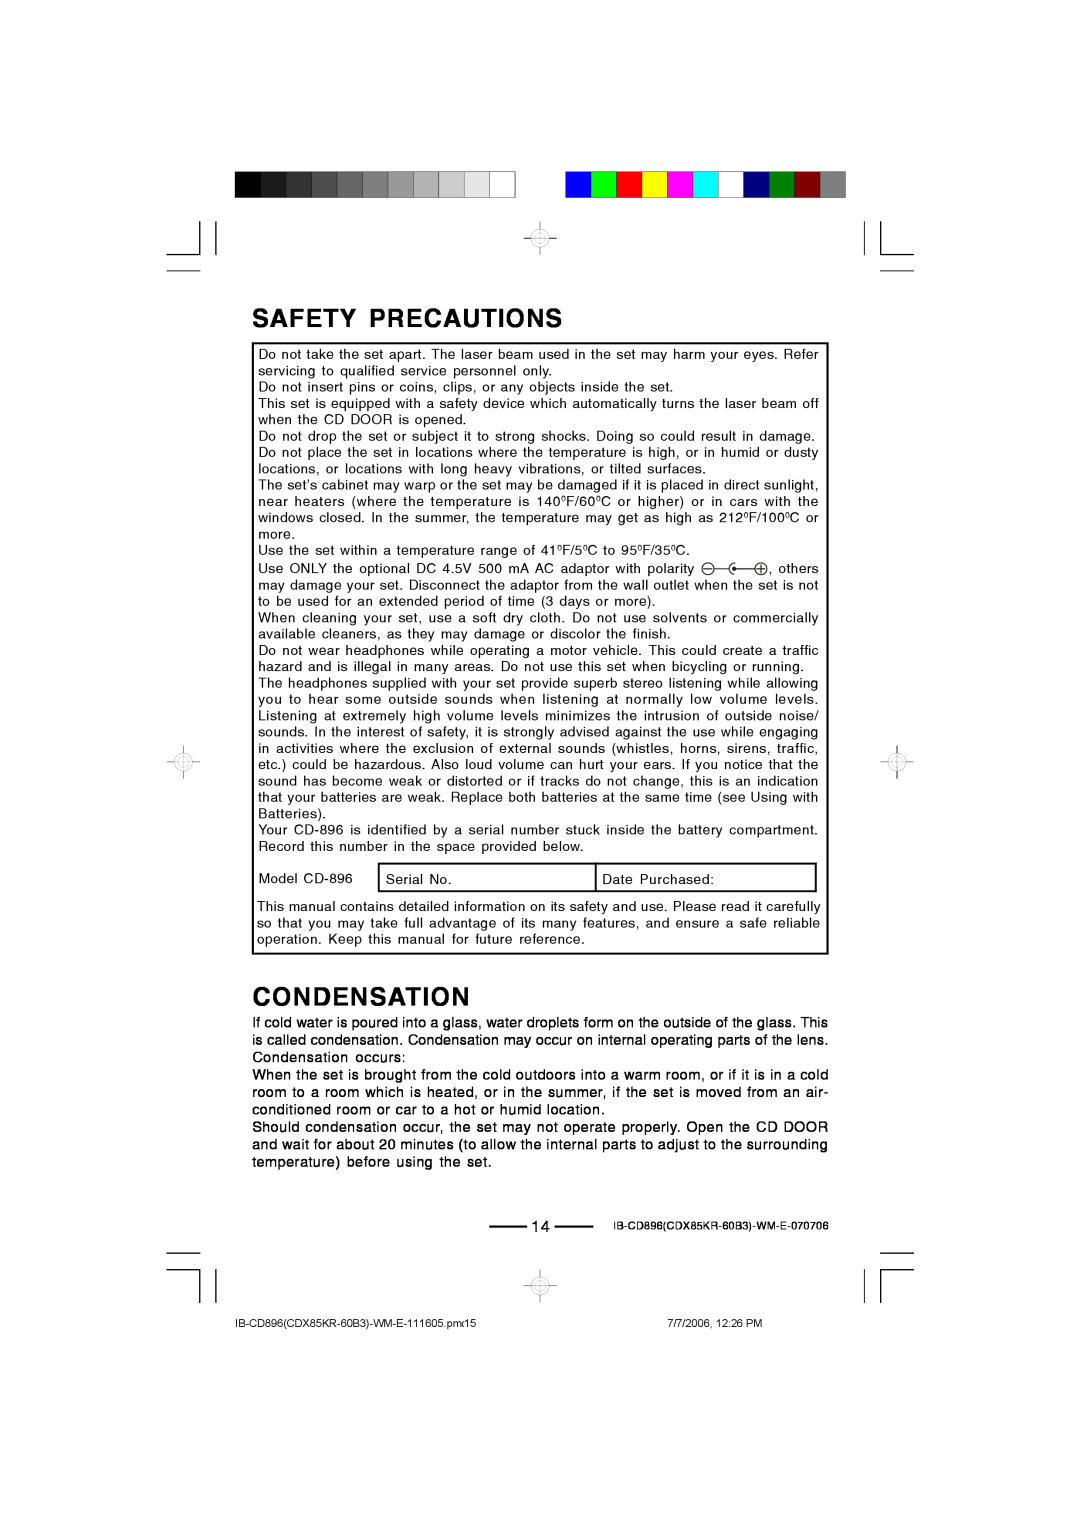 Lenoxx Electronics CD-896 operating instructions Safety Precautions, Condensation 